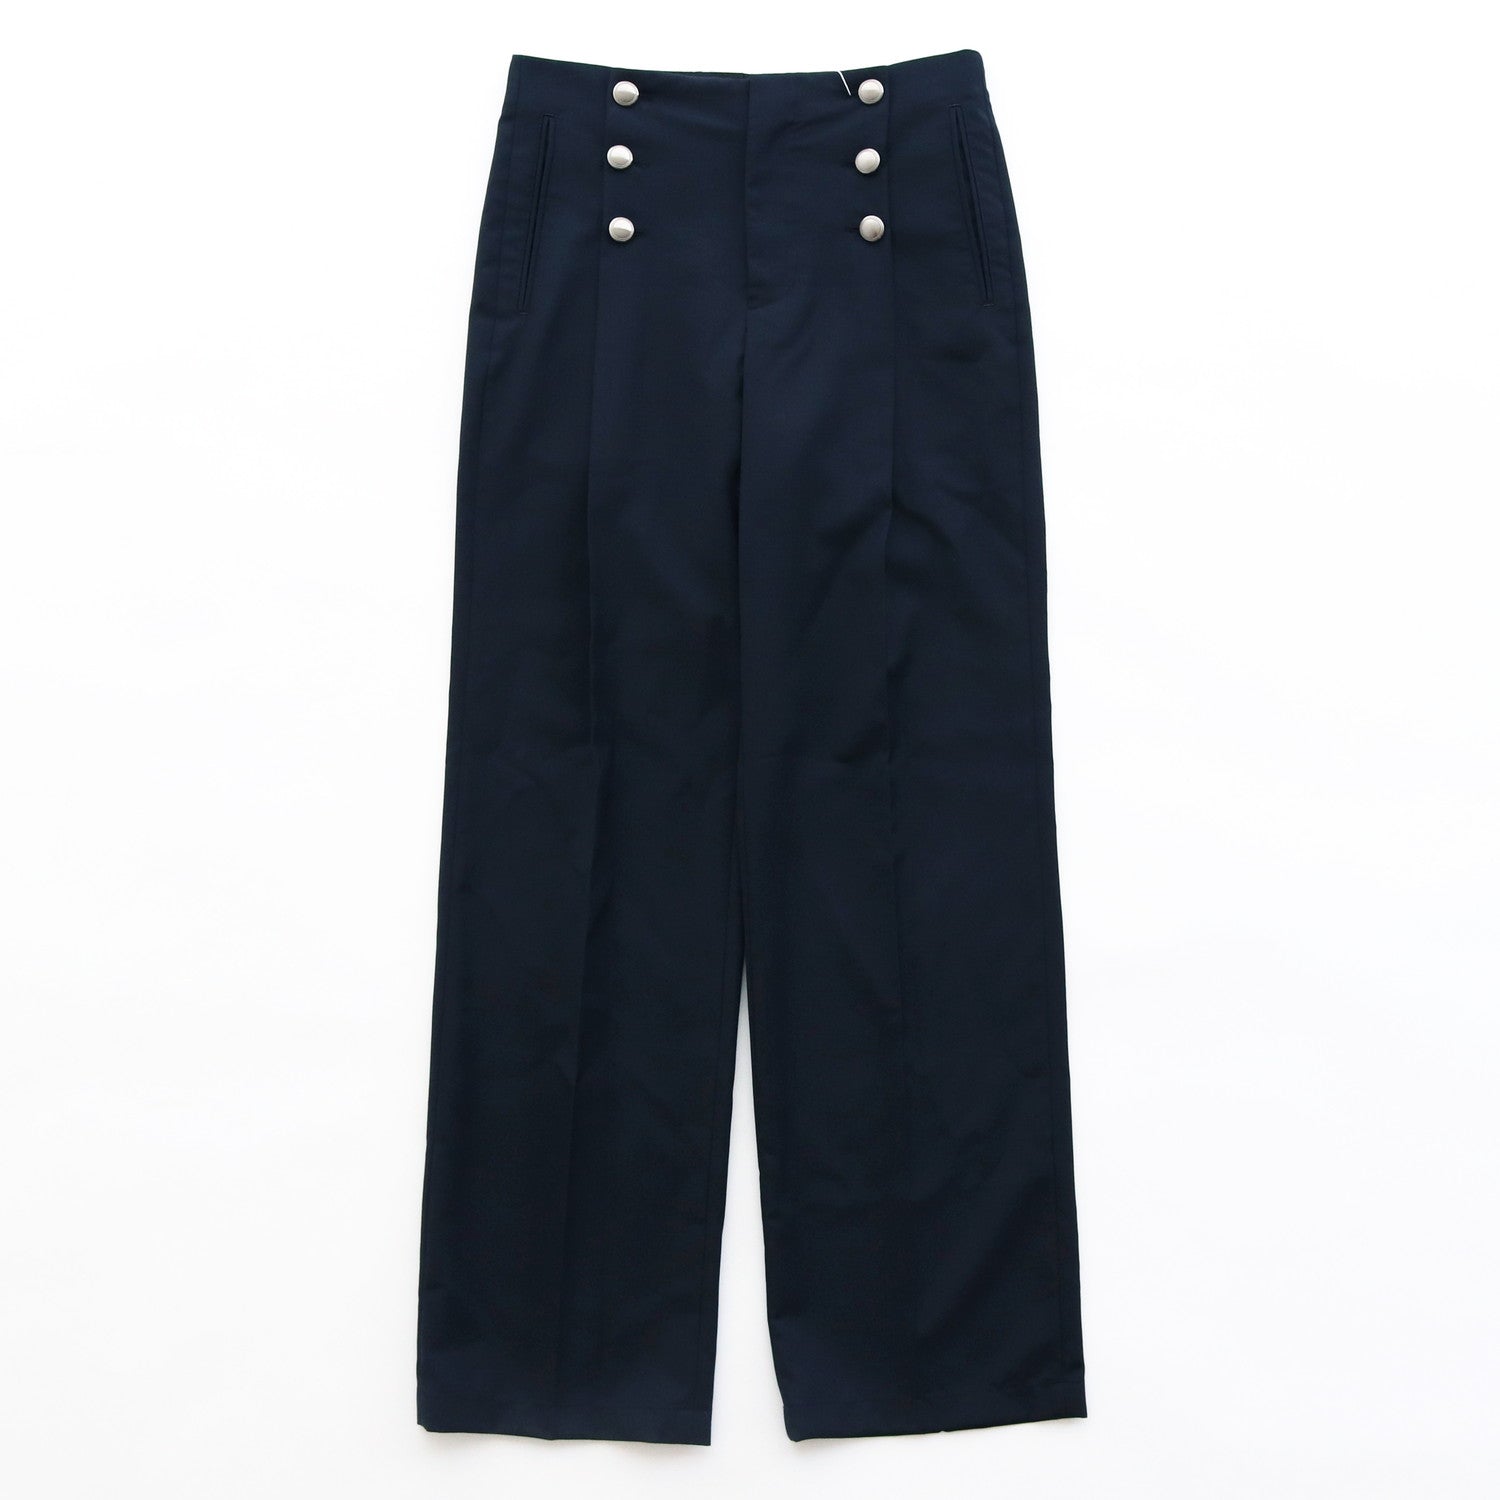 SAILOR TROUSERS #NAVY [LB231-PT08] - LITTLEBIG（リトルビッグ）23ss 